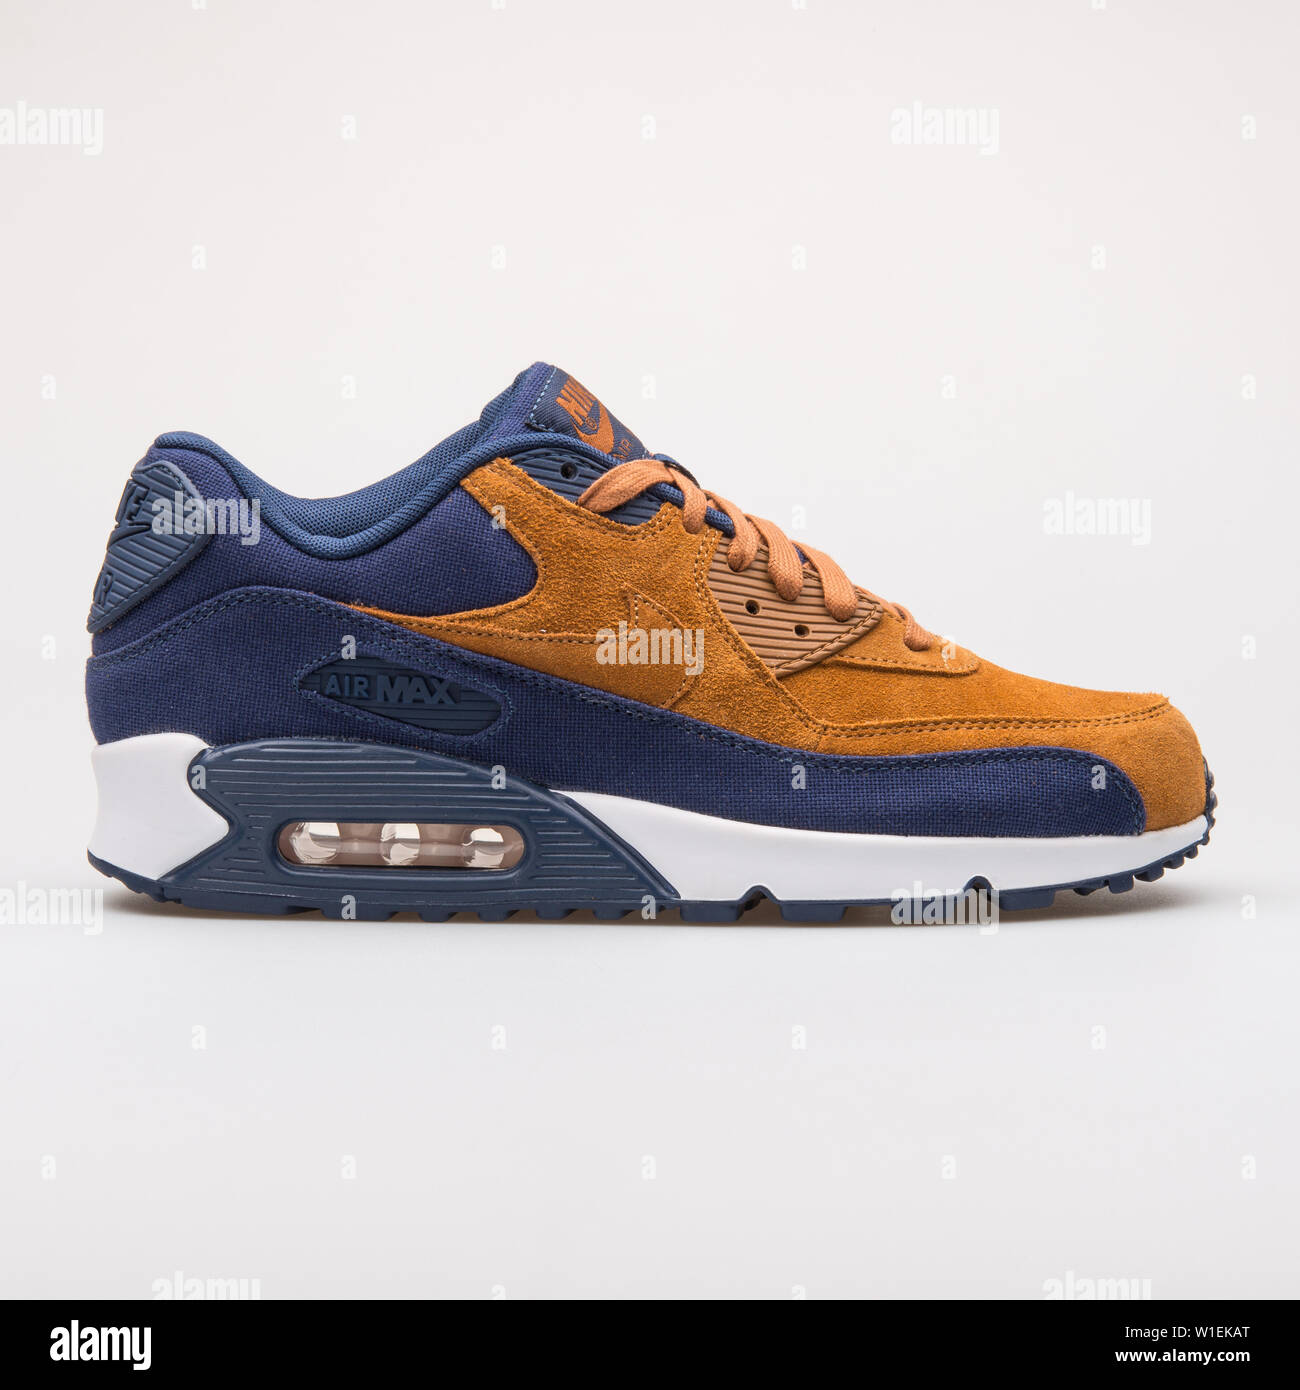 VIENNA, AUSTRIA - AUGUST 28, 2017: Nike Air Max 90 Premium navy blue and  brown sneaker on white background Stock Photo - Alamy